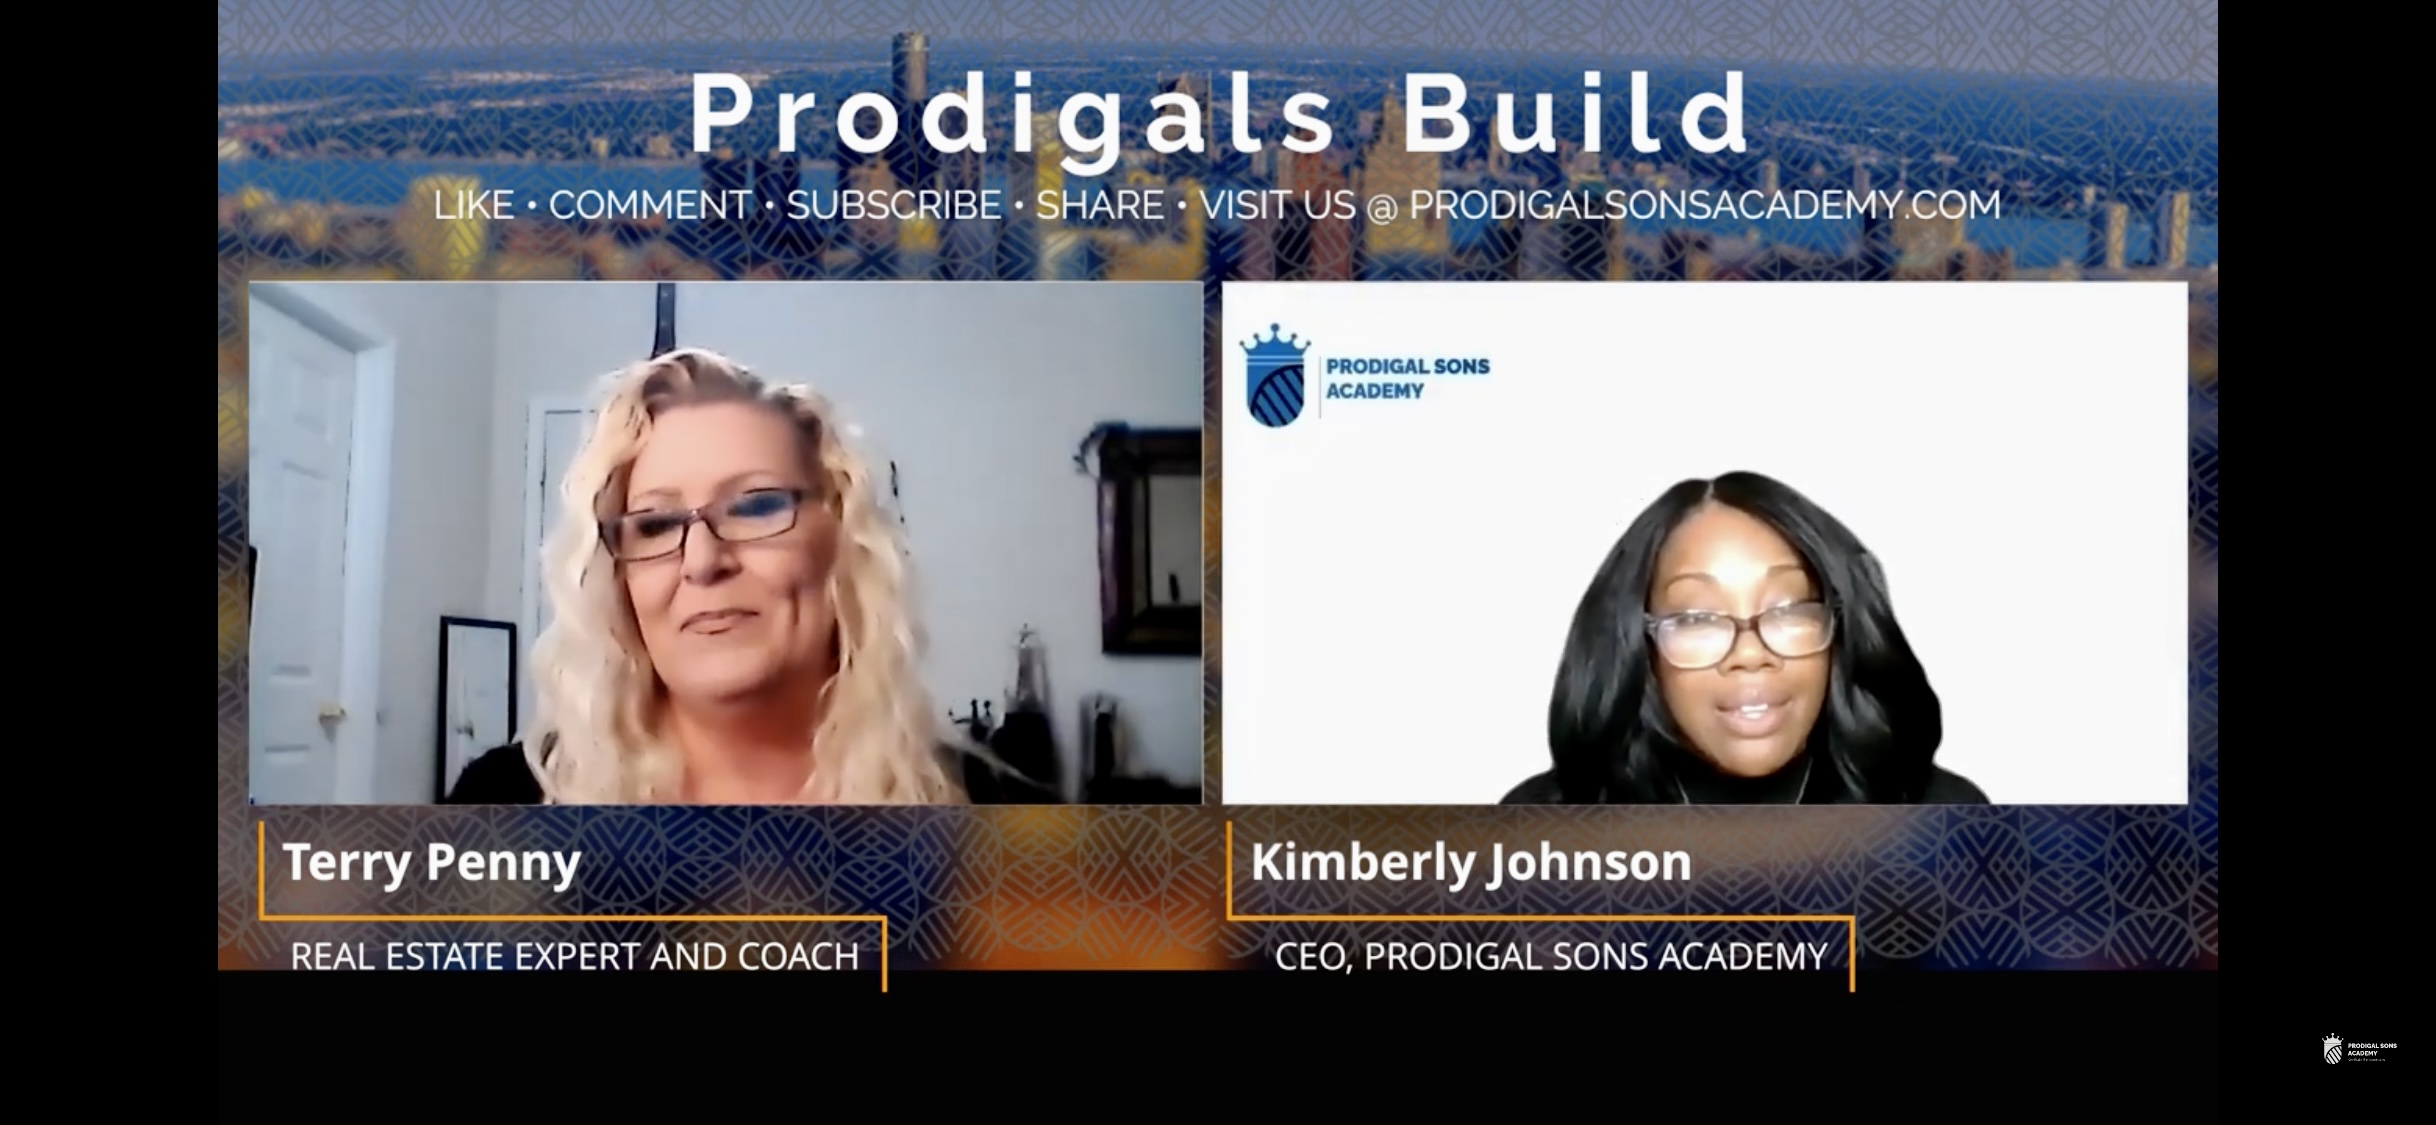 WATCH Prodigal Sons Academy YOUTUBE VIDEO